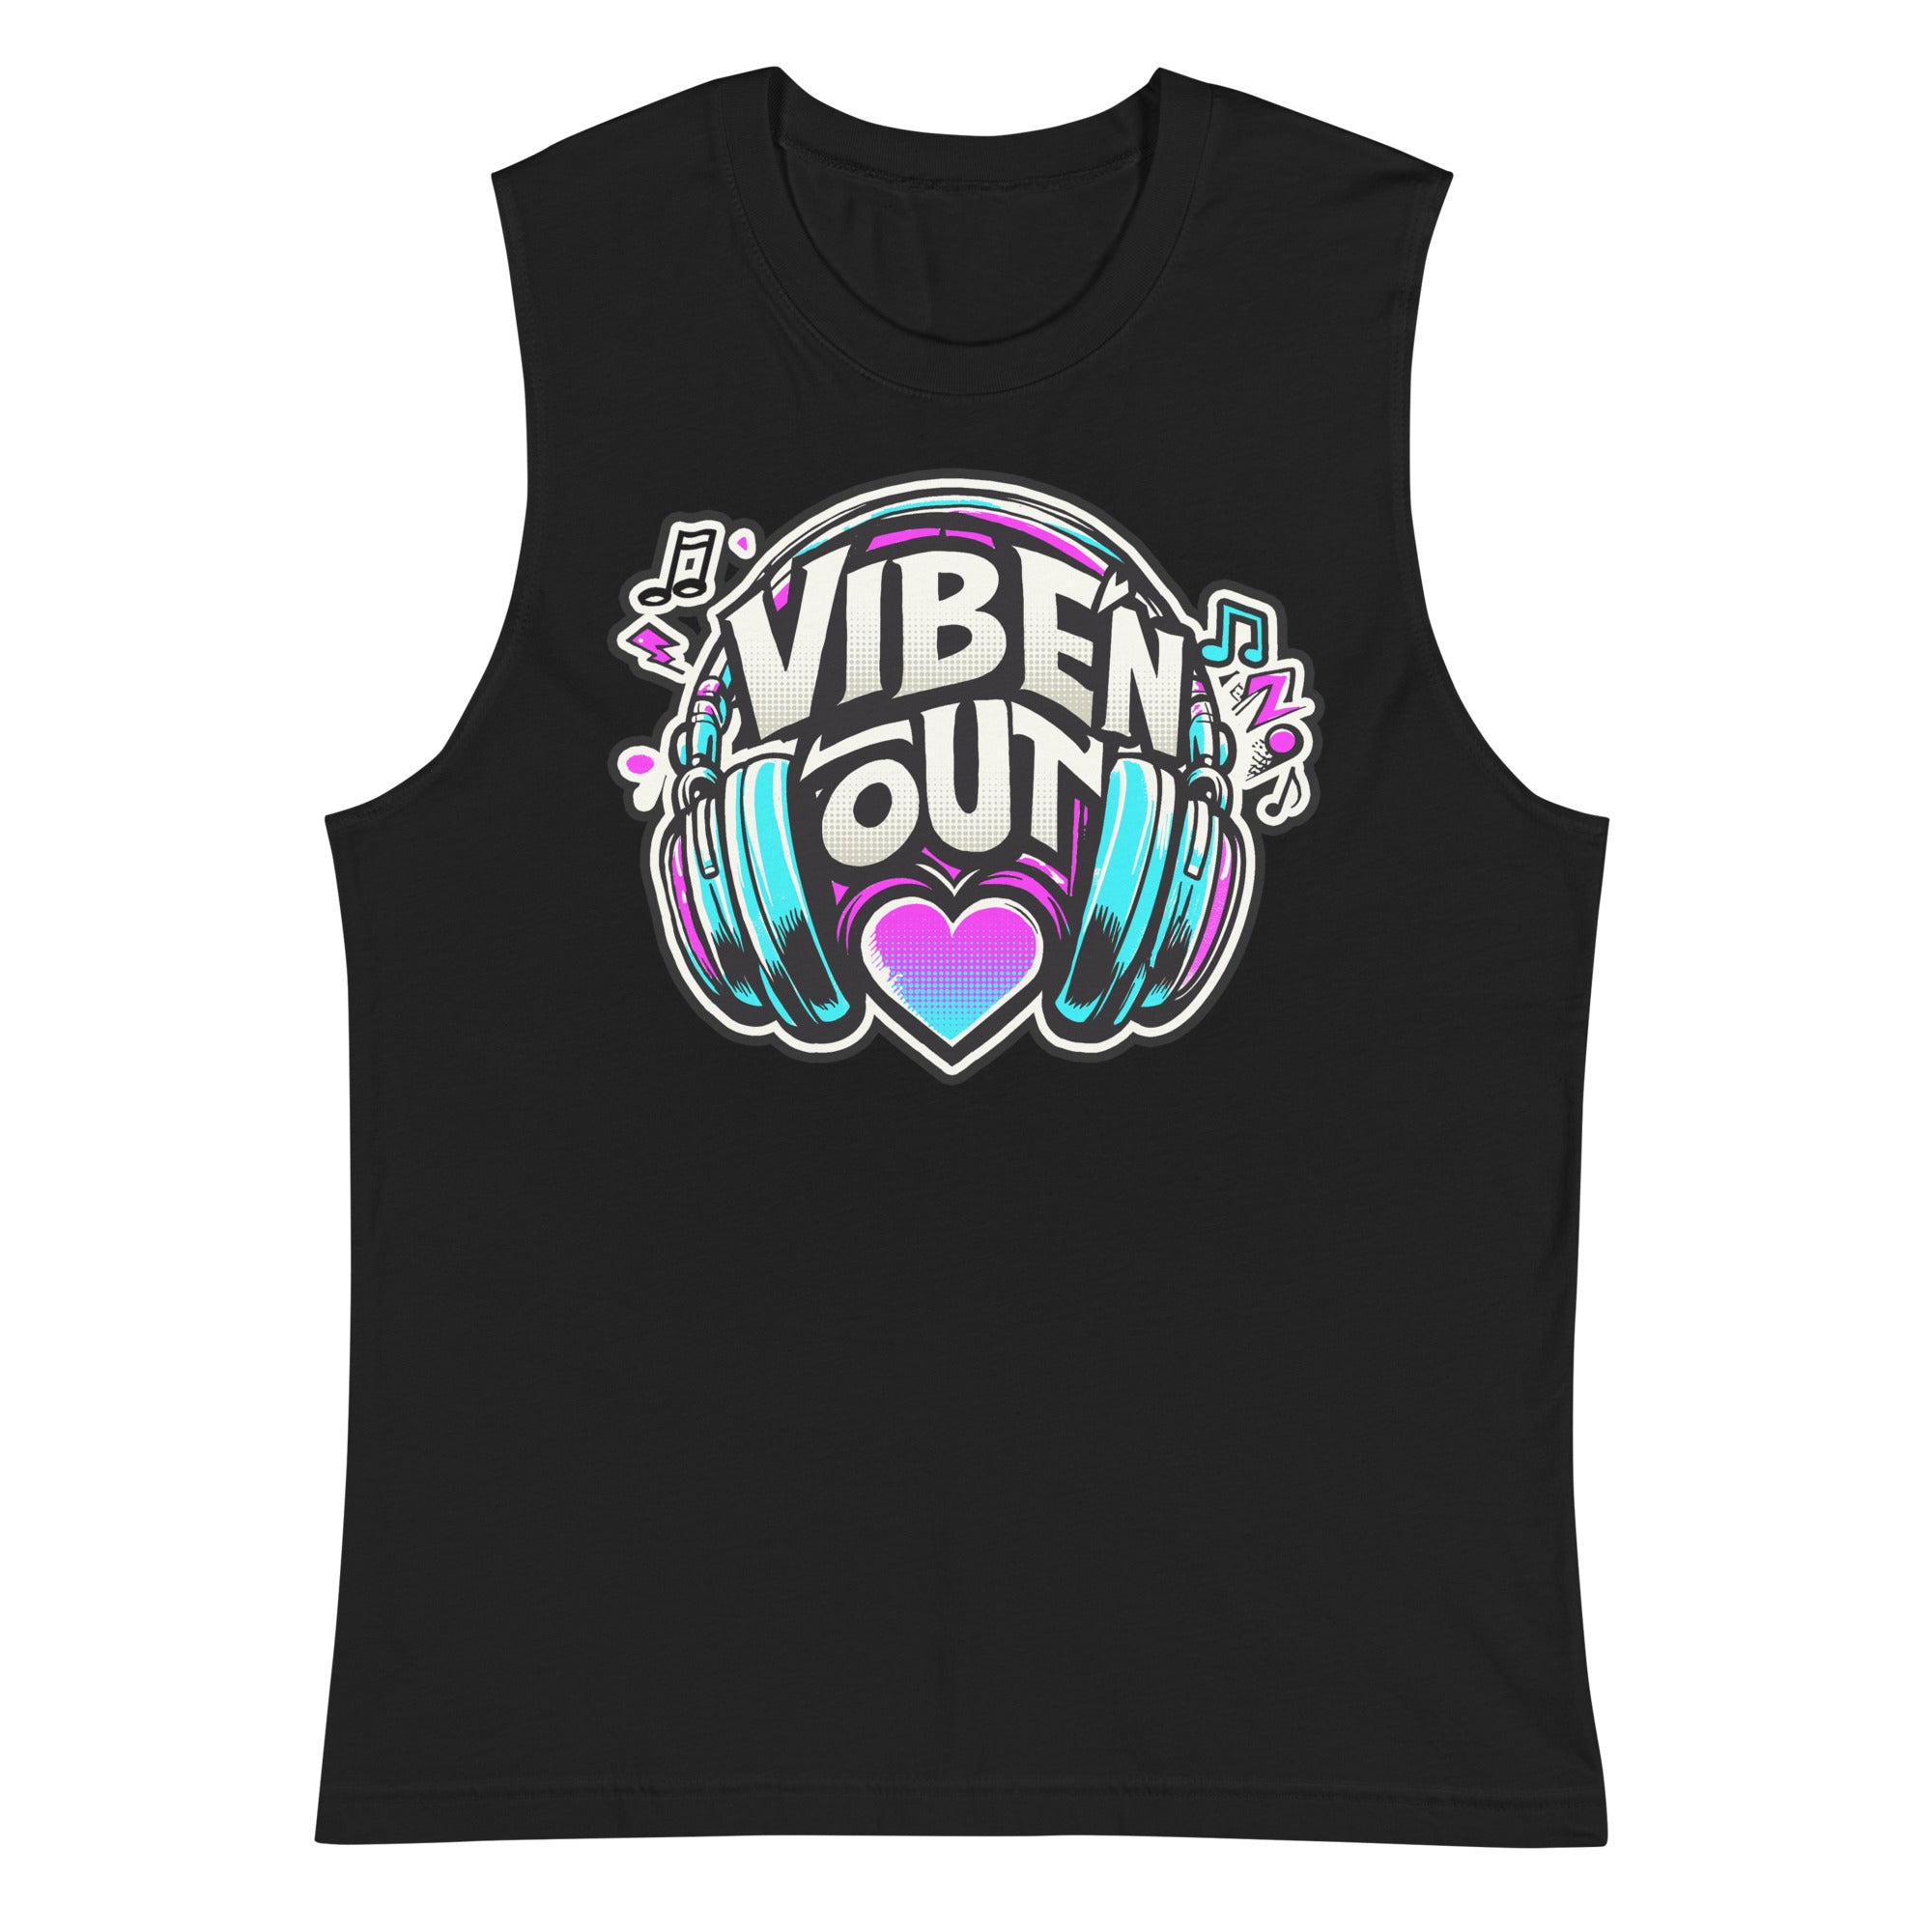 VIBE'N OUT - Muscle Shirt - Beats 4 Hope